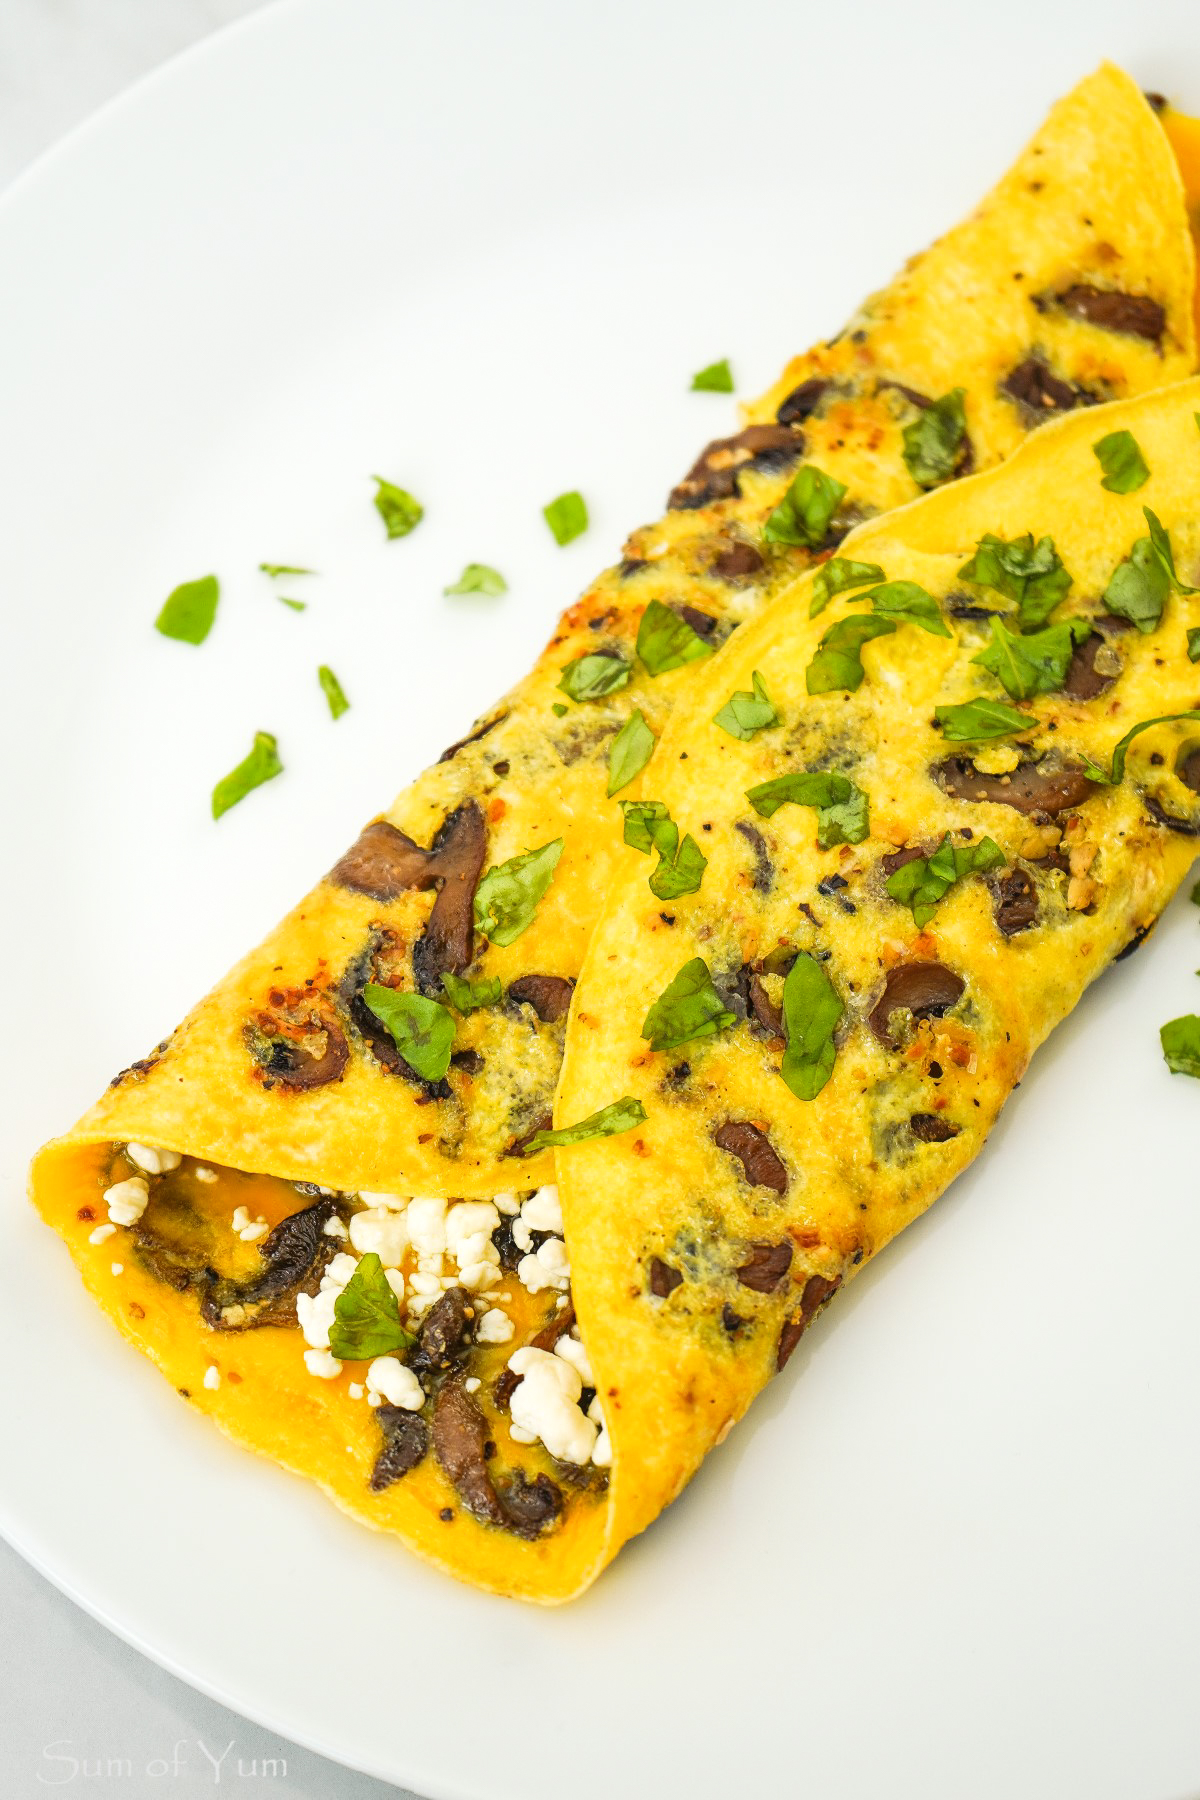 Mushroom Omelet with Goat Cheese